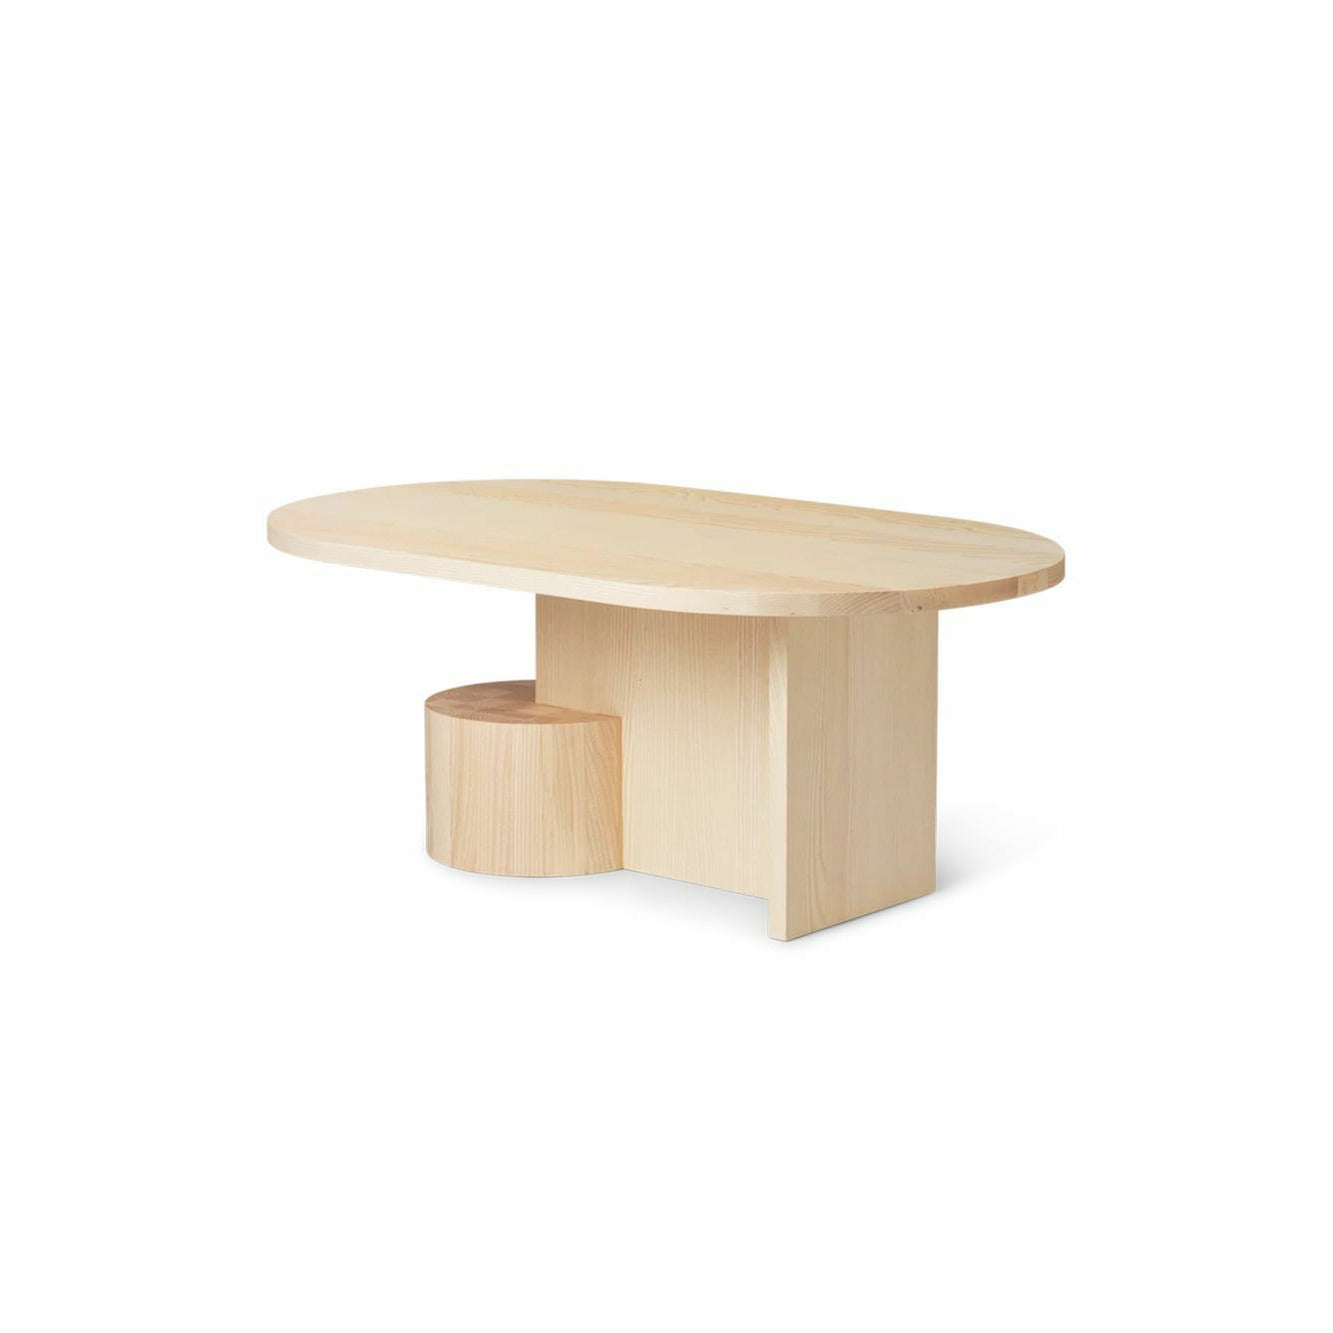 Ferm Living Insert Coffee Table, Natural Ash